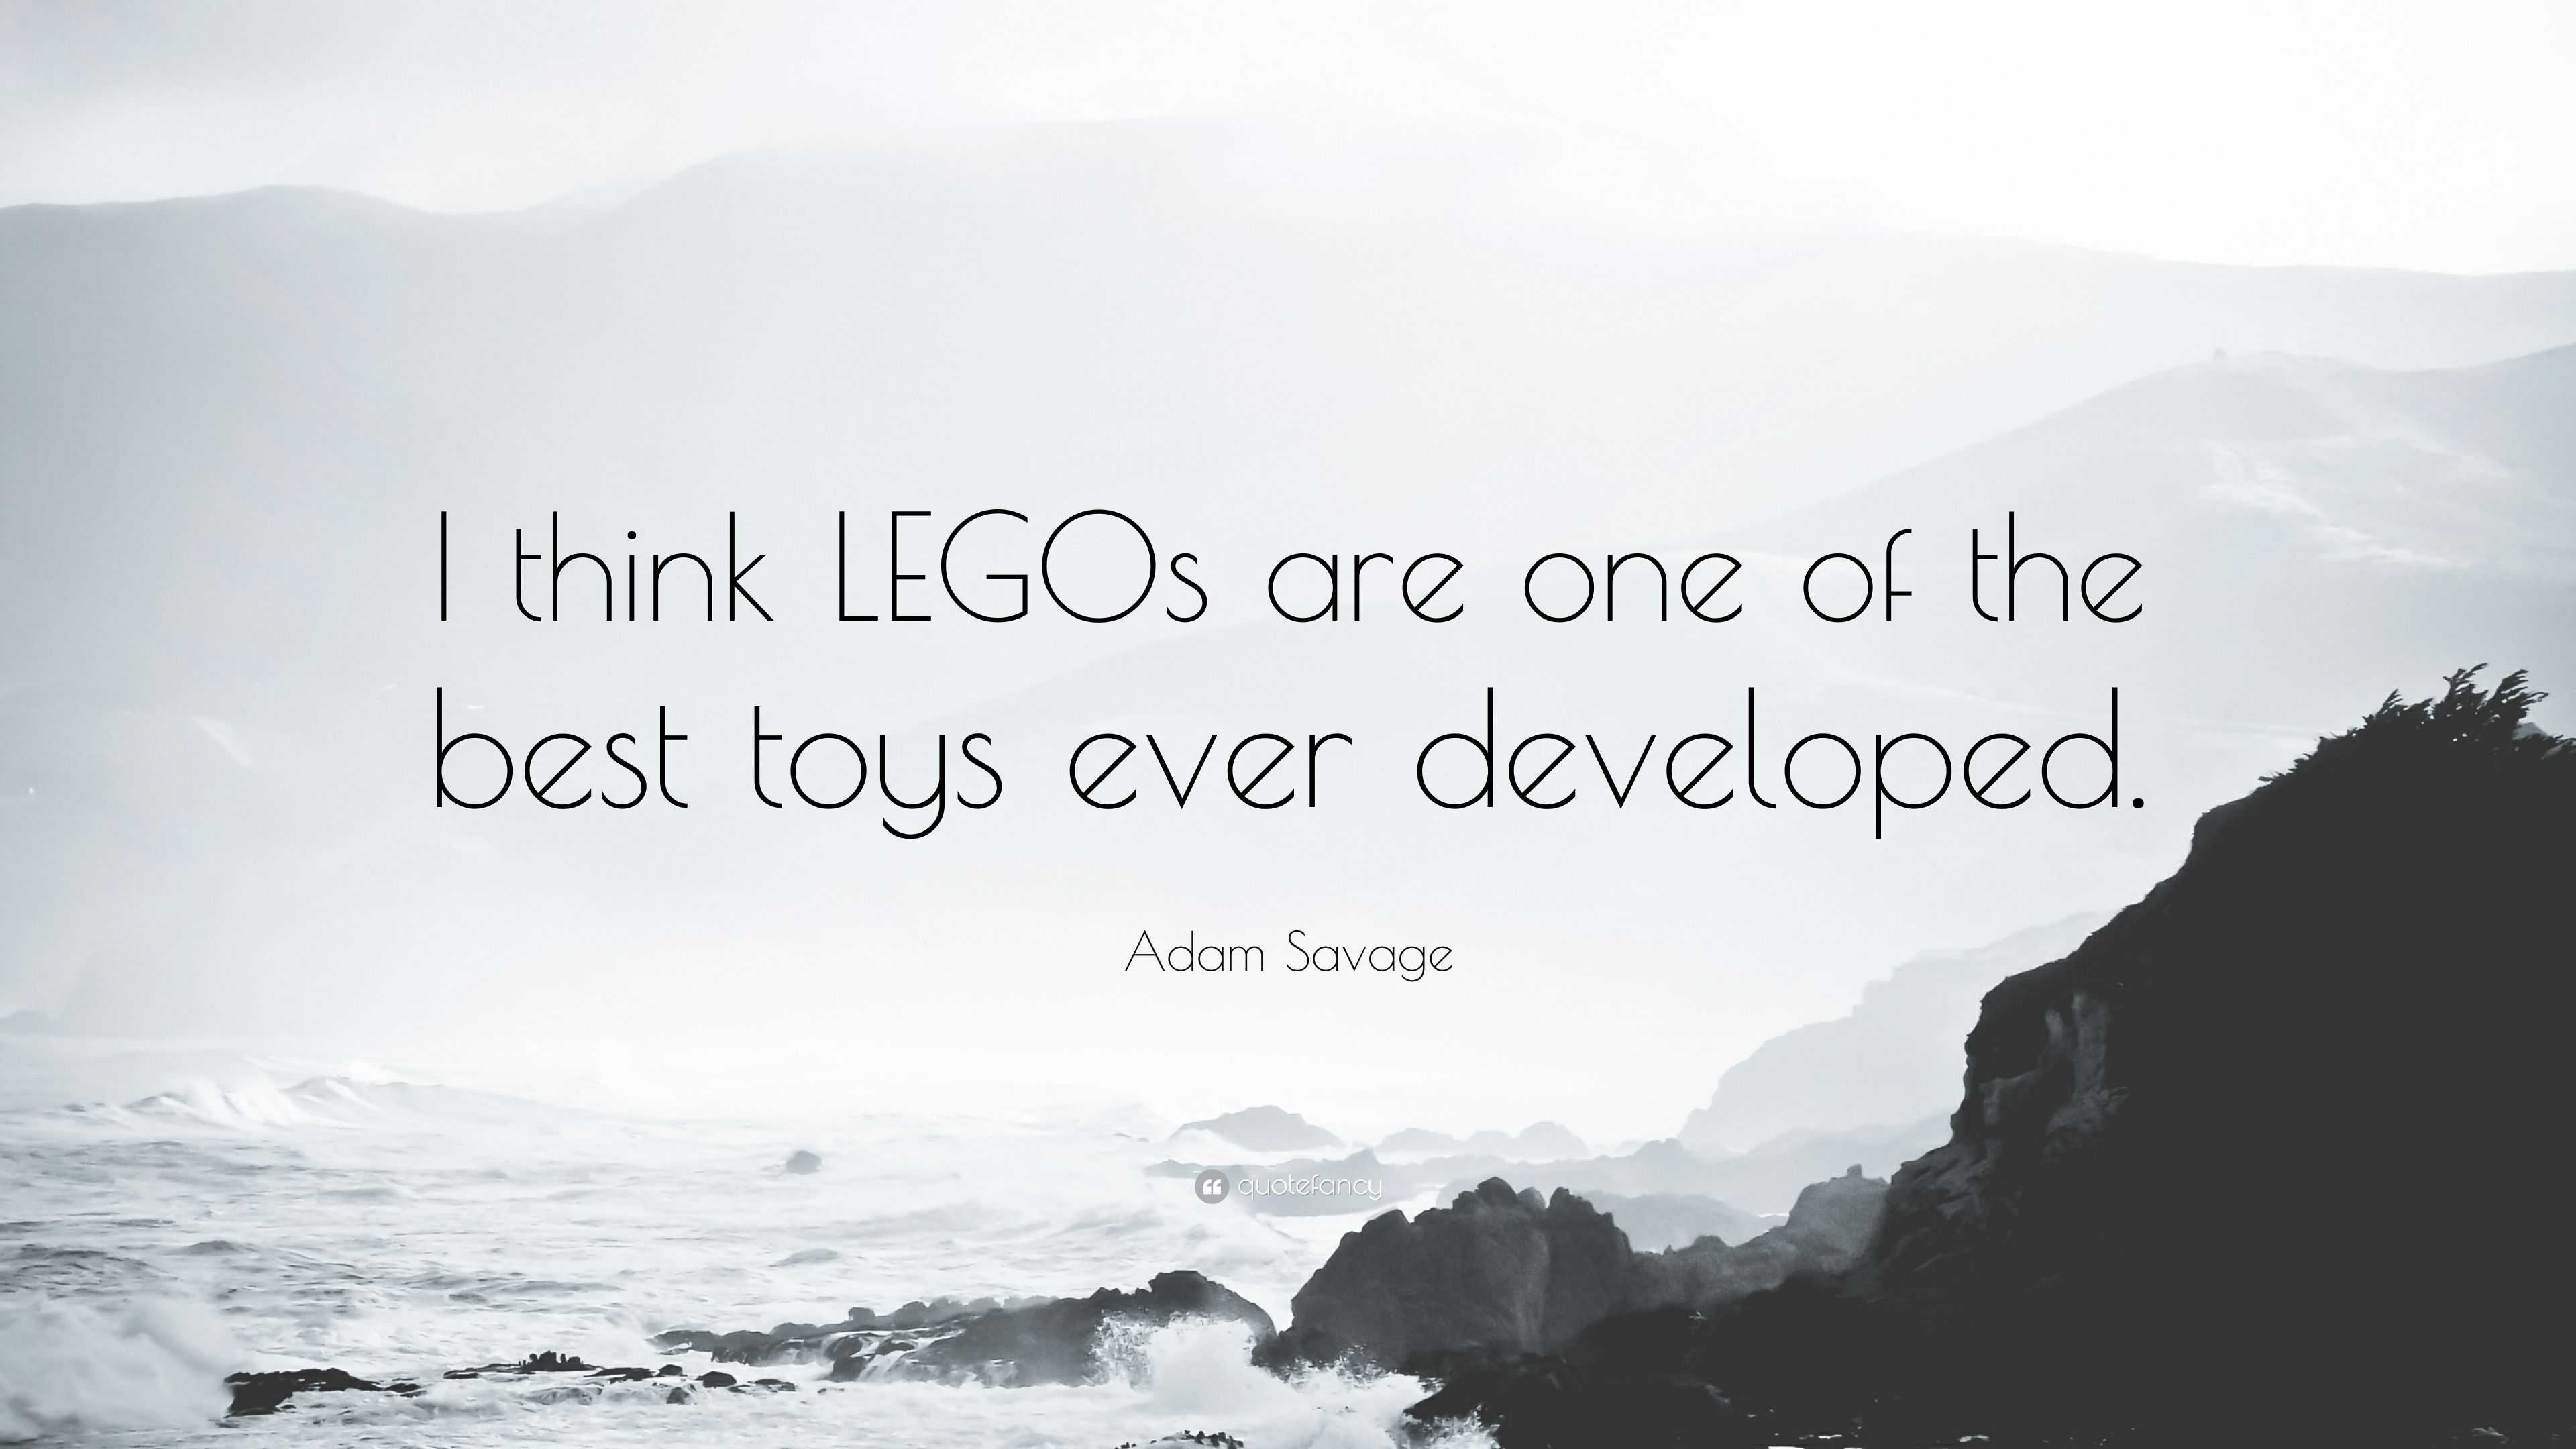 https://quotefancy.com/media/wallpaper/3840x2160/3379345-Adam-Savage-Quote-I-think-LEGOs-are-one-of-the-best-toys-ever.jpg